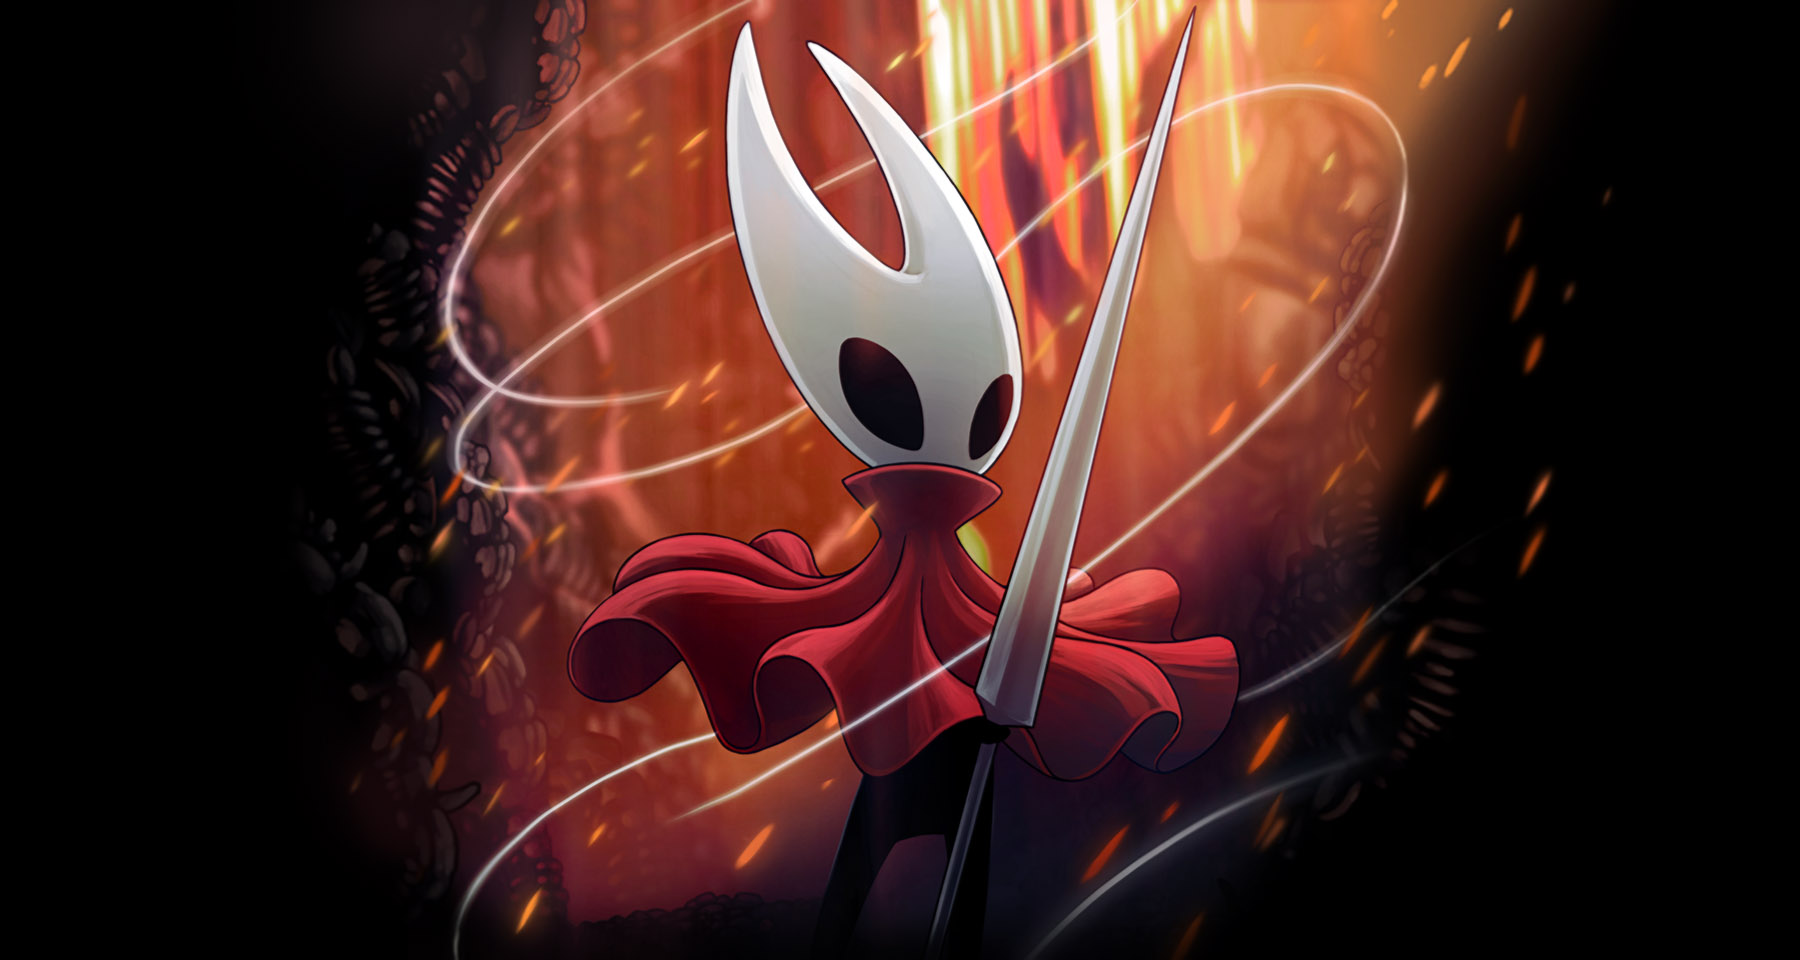 Hollow Knight Silksong in development and its free if you